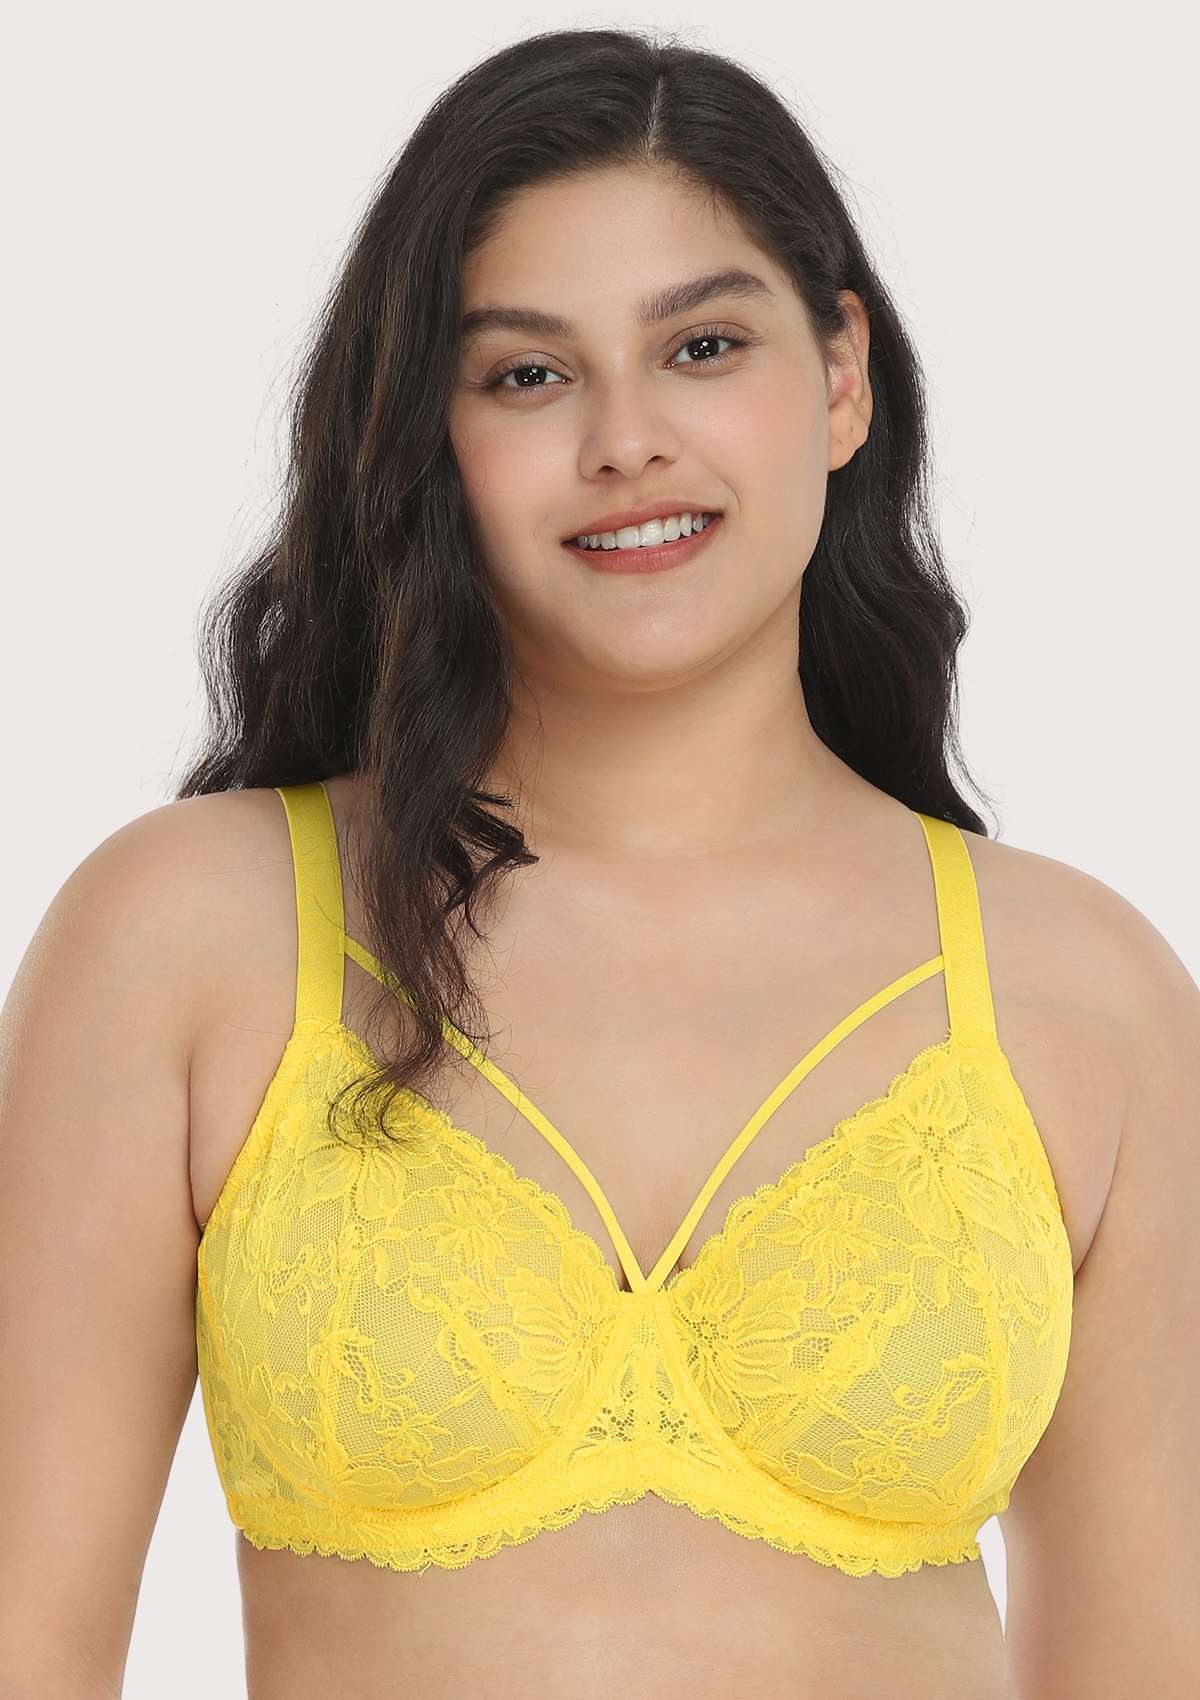 HSIA Unlined Lace Mesh Minimizer Bra For Large Breasts, Full Coverage - Bright Yellow / 42 / G